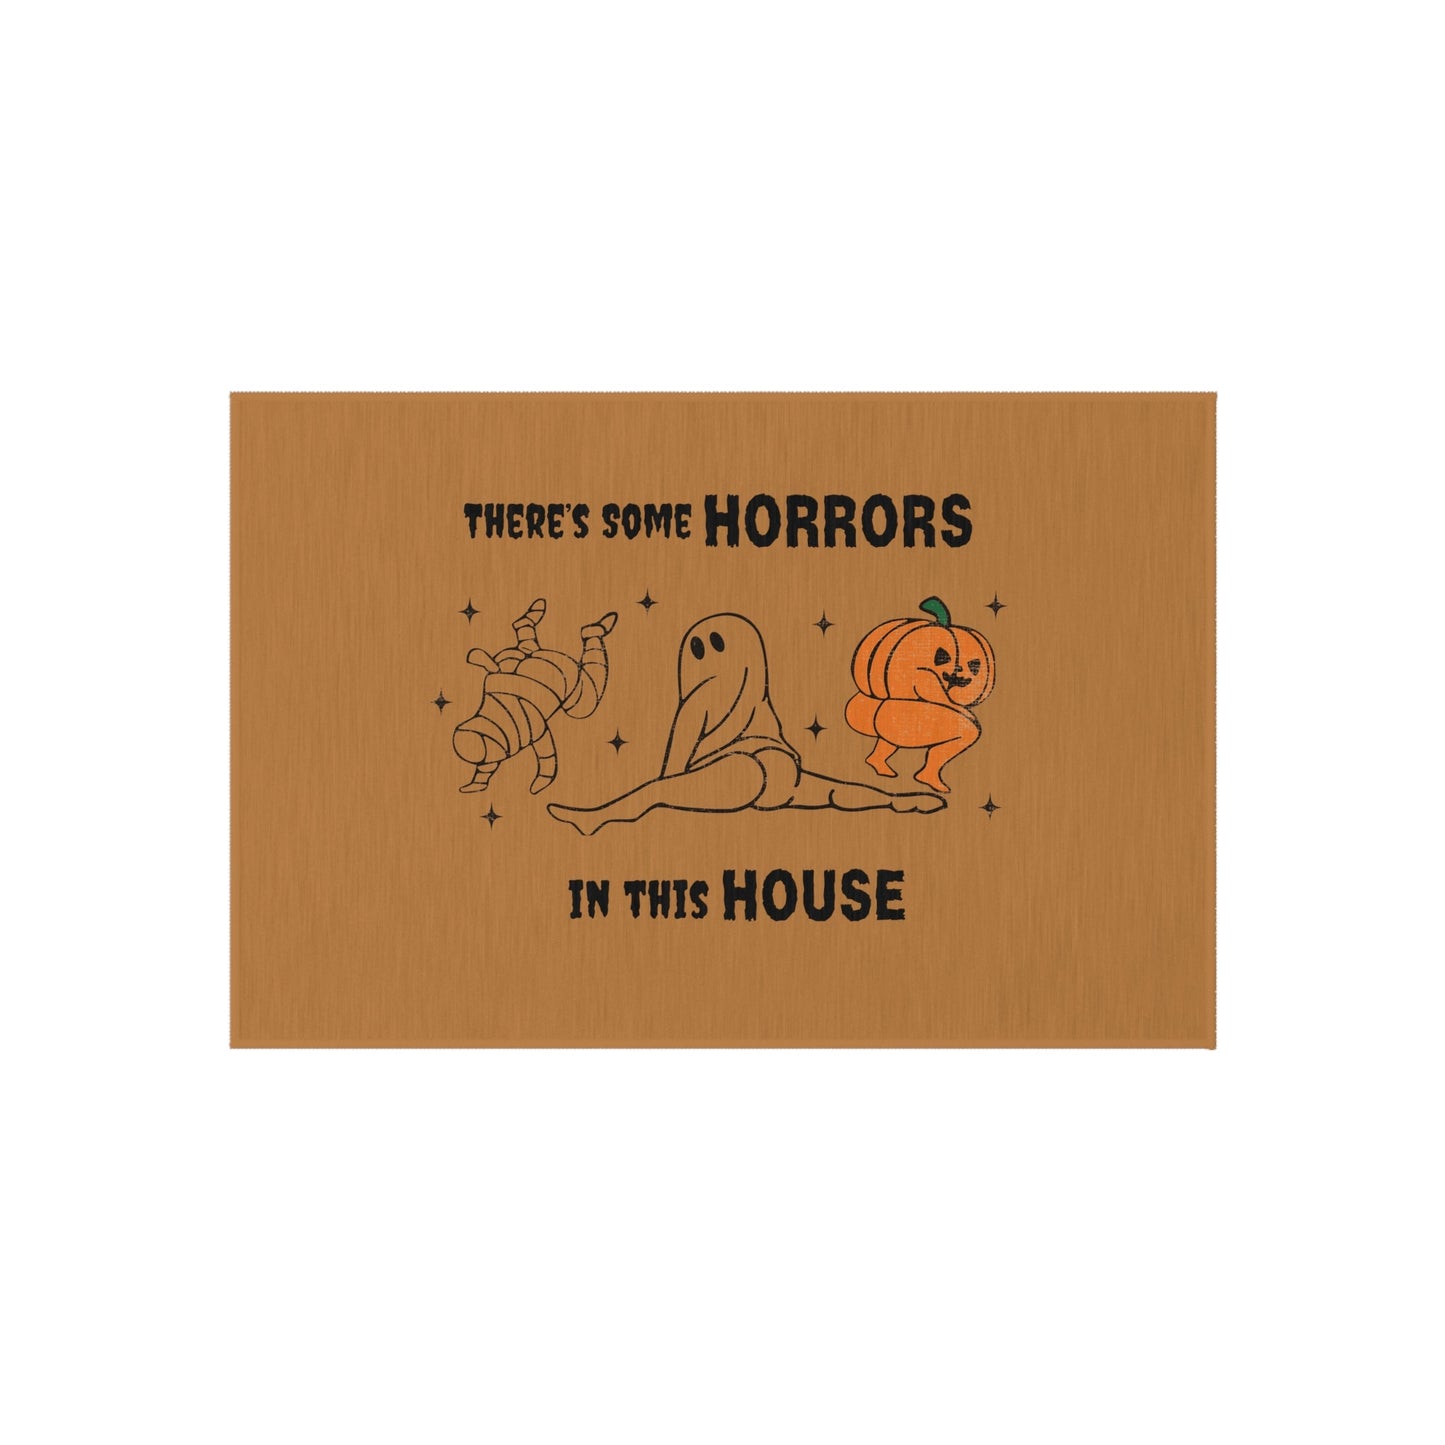 Get trendy with There's Some Horrors in this House Outdoor Rug - Home Decor available at Good Gift Company. Grab yours for $32 today!